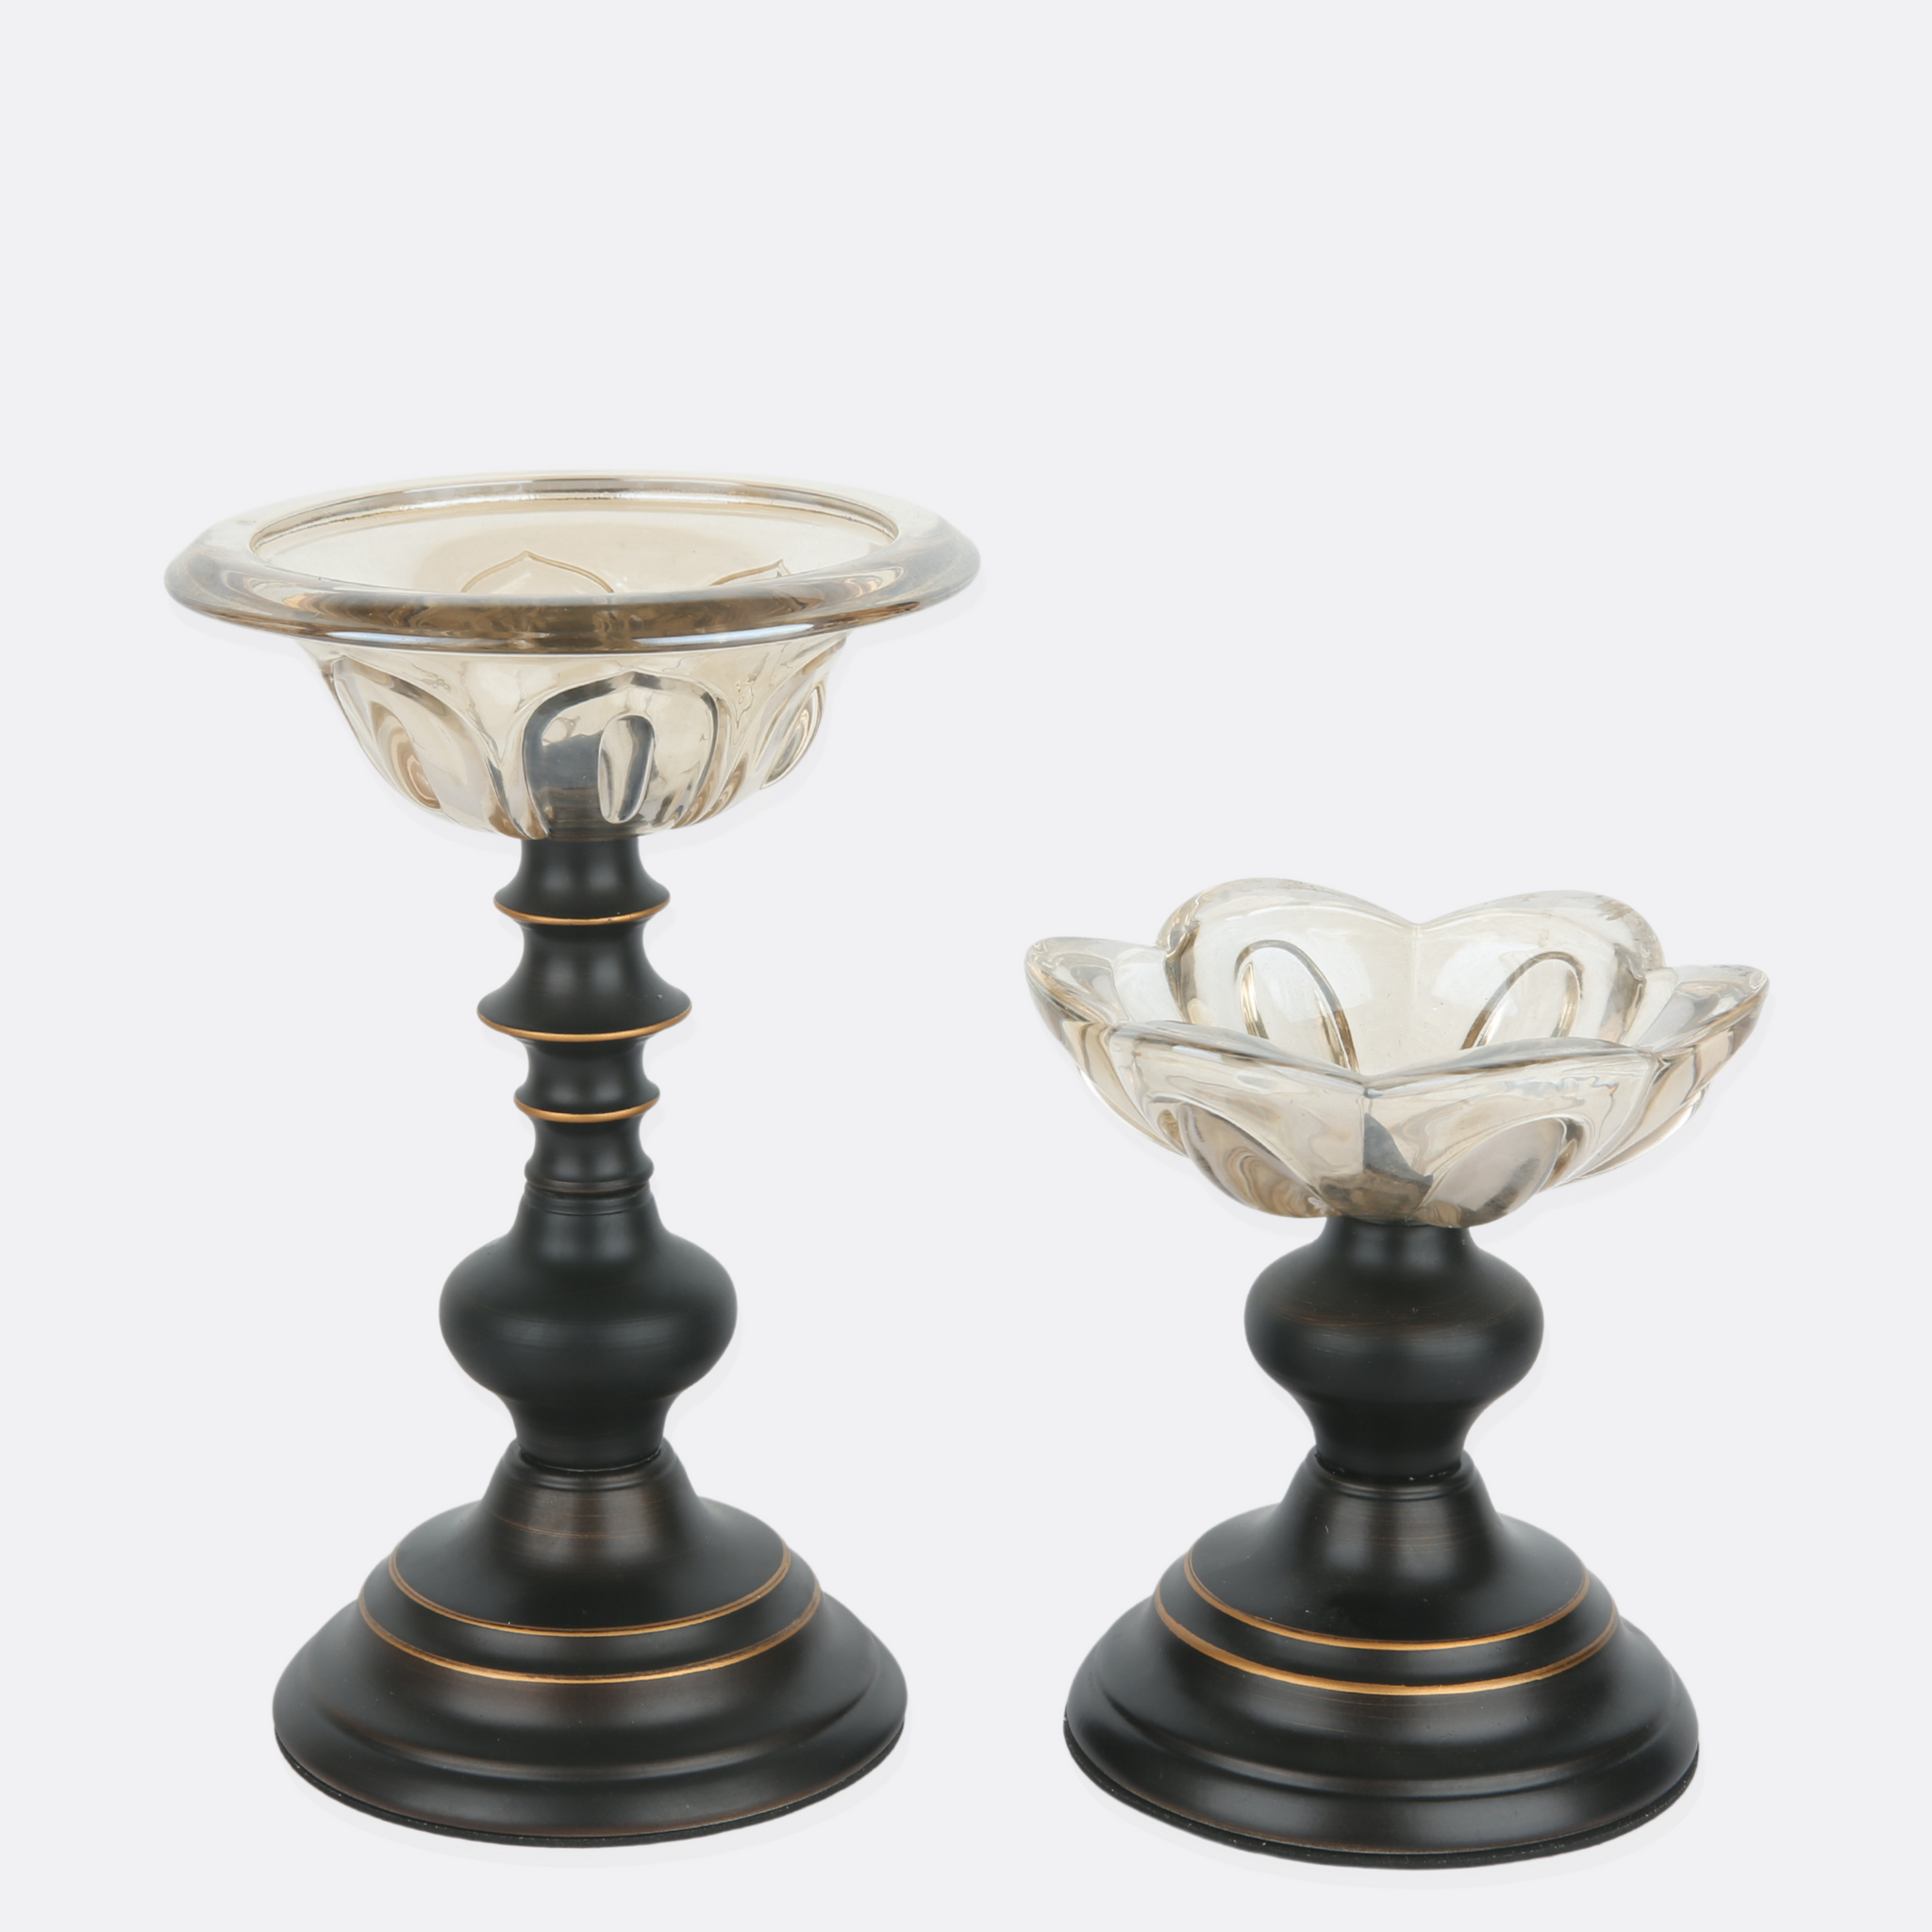 Royal Candle Holders ( 2 Sizes )